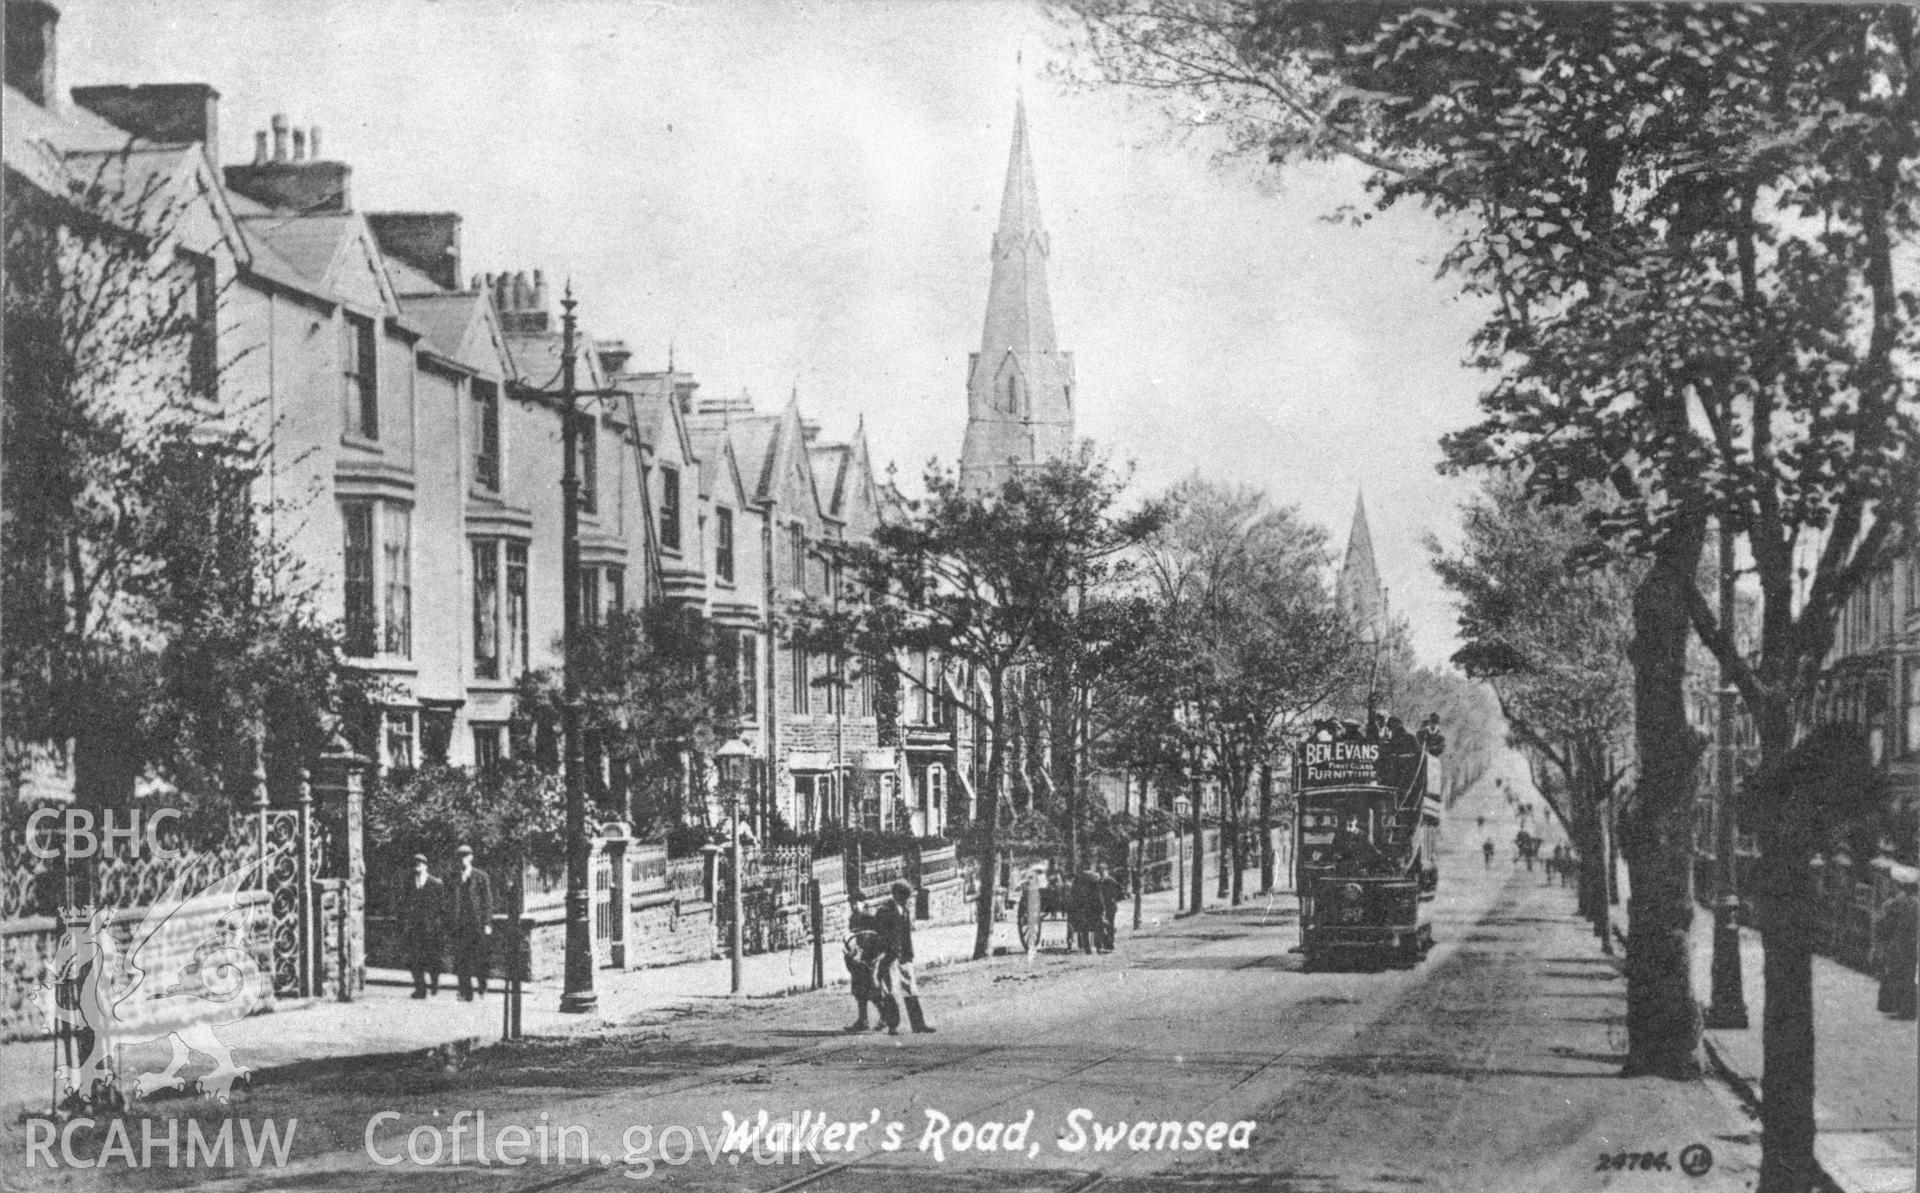 Copy of an early black and white photograph showing Walter Road, Swansea.